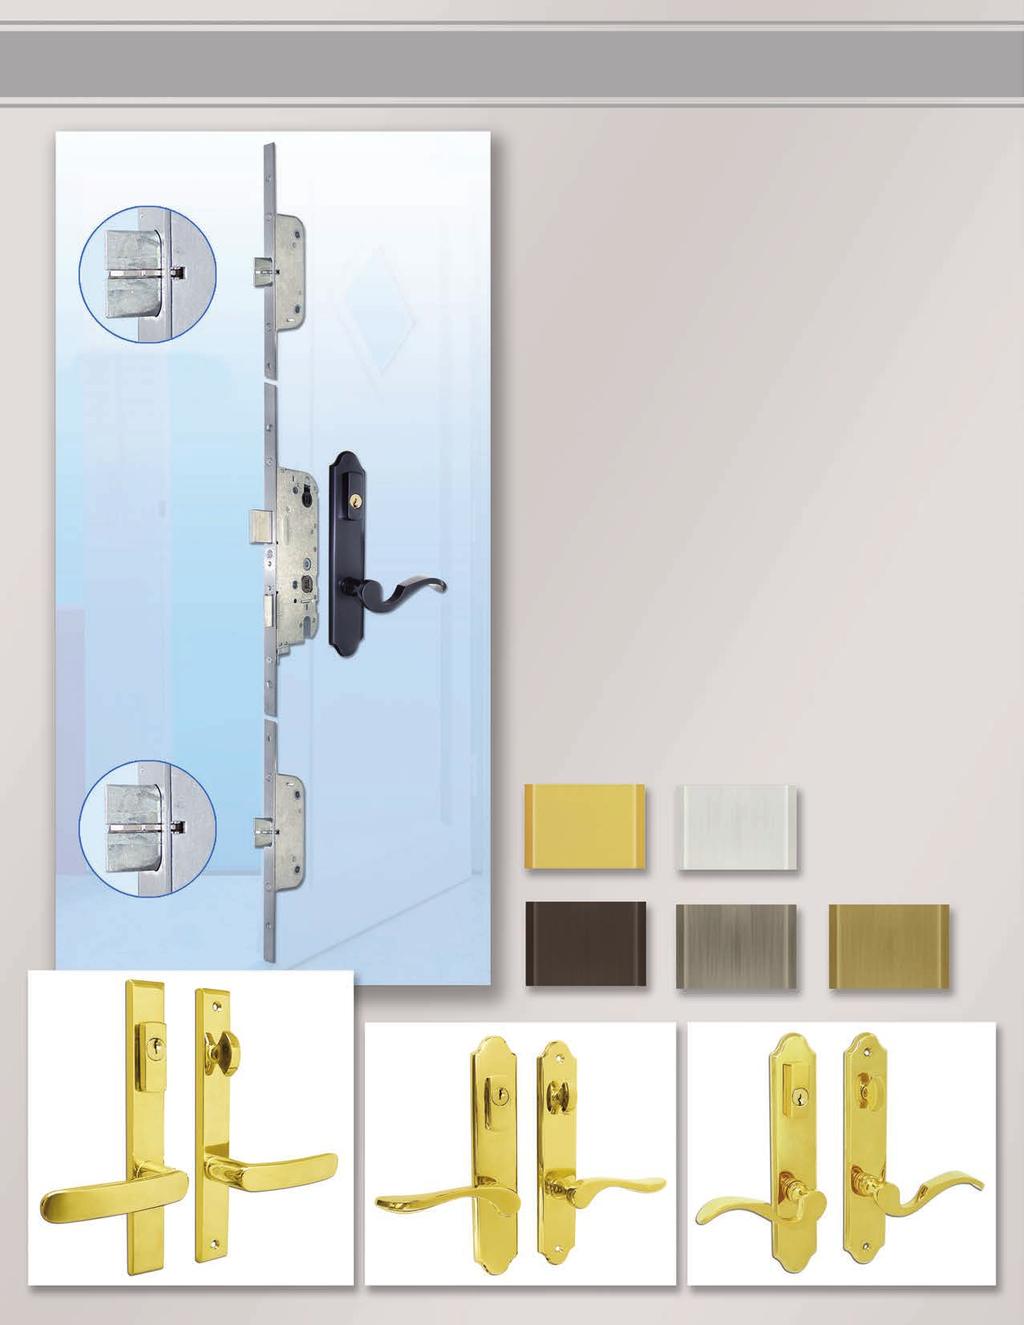 Simply Close the Door THE DOOR THAT LOCKS ITSELF Ferco's "Simply Secure" 3-deadbolt locking system activates automatically.